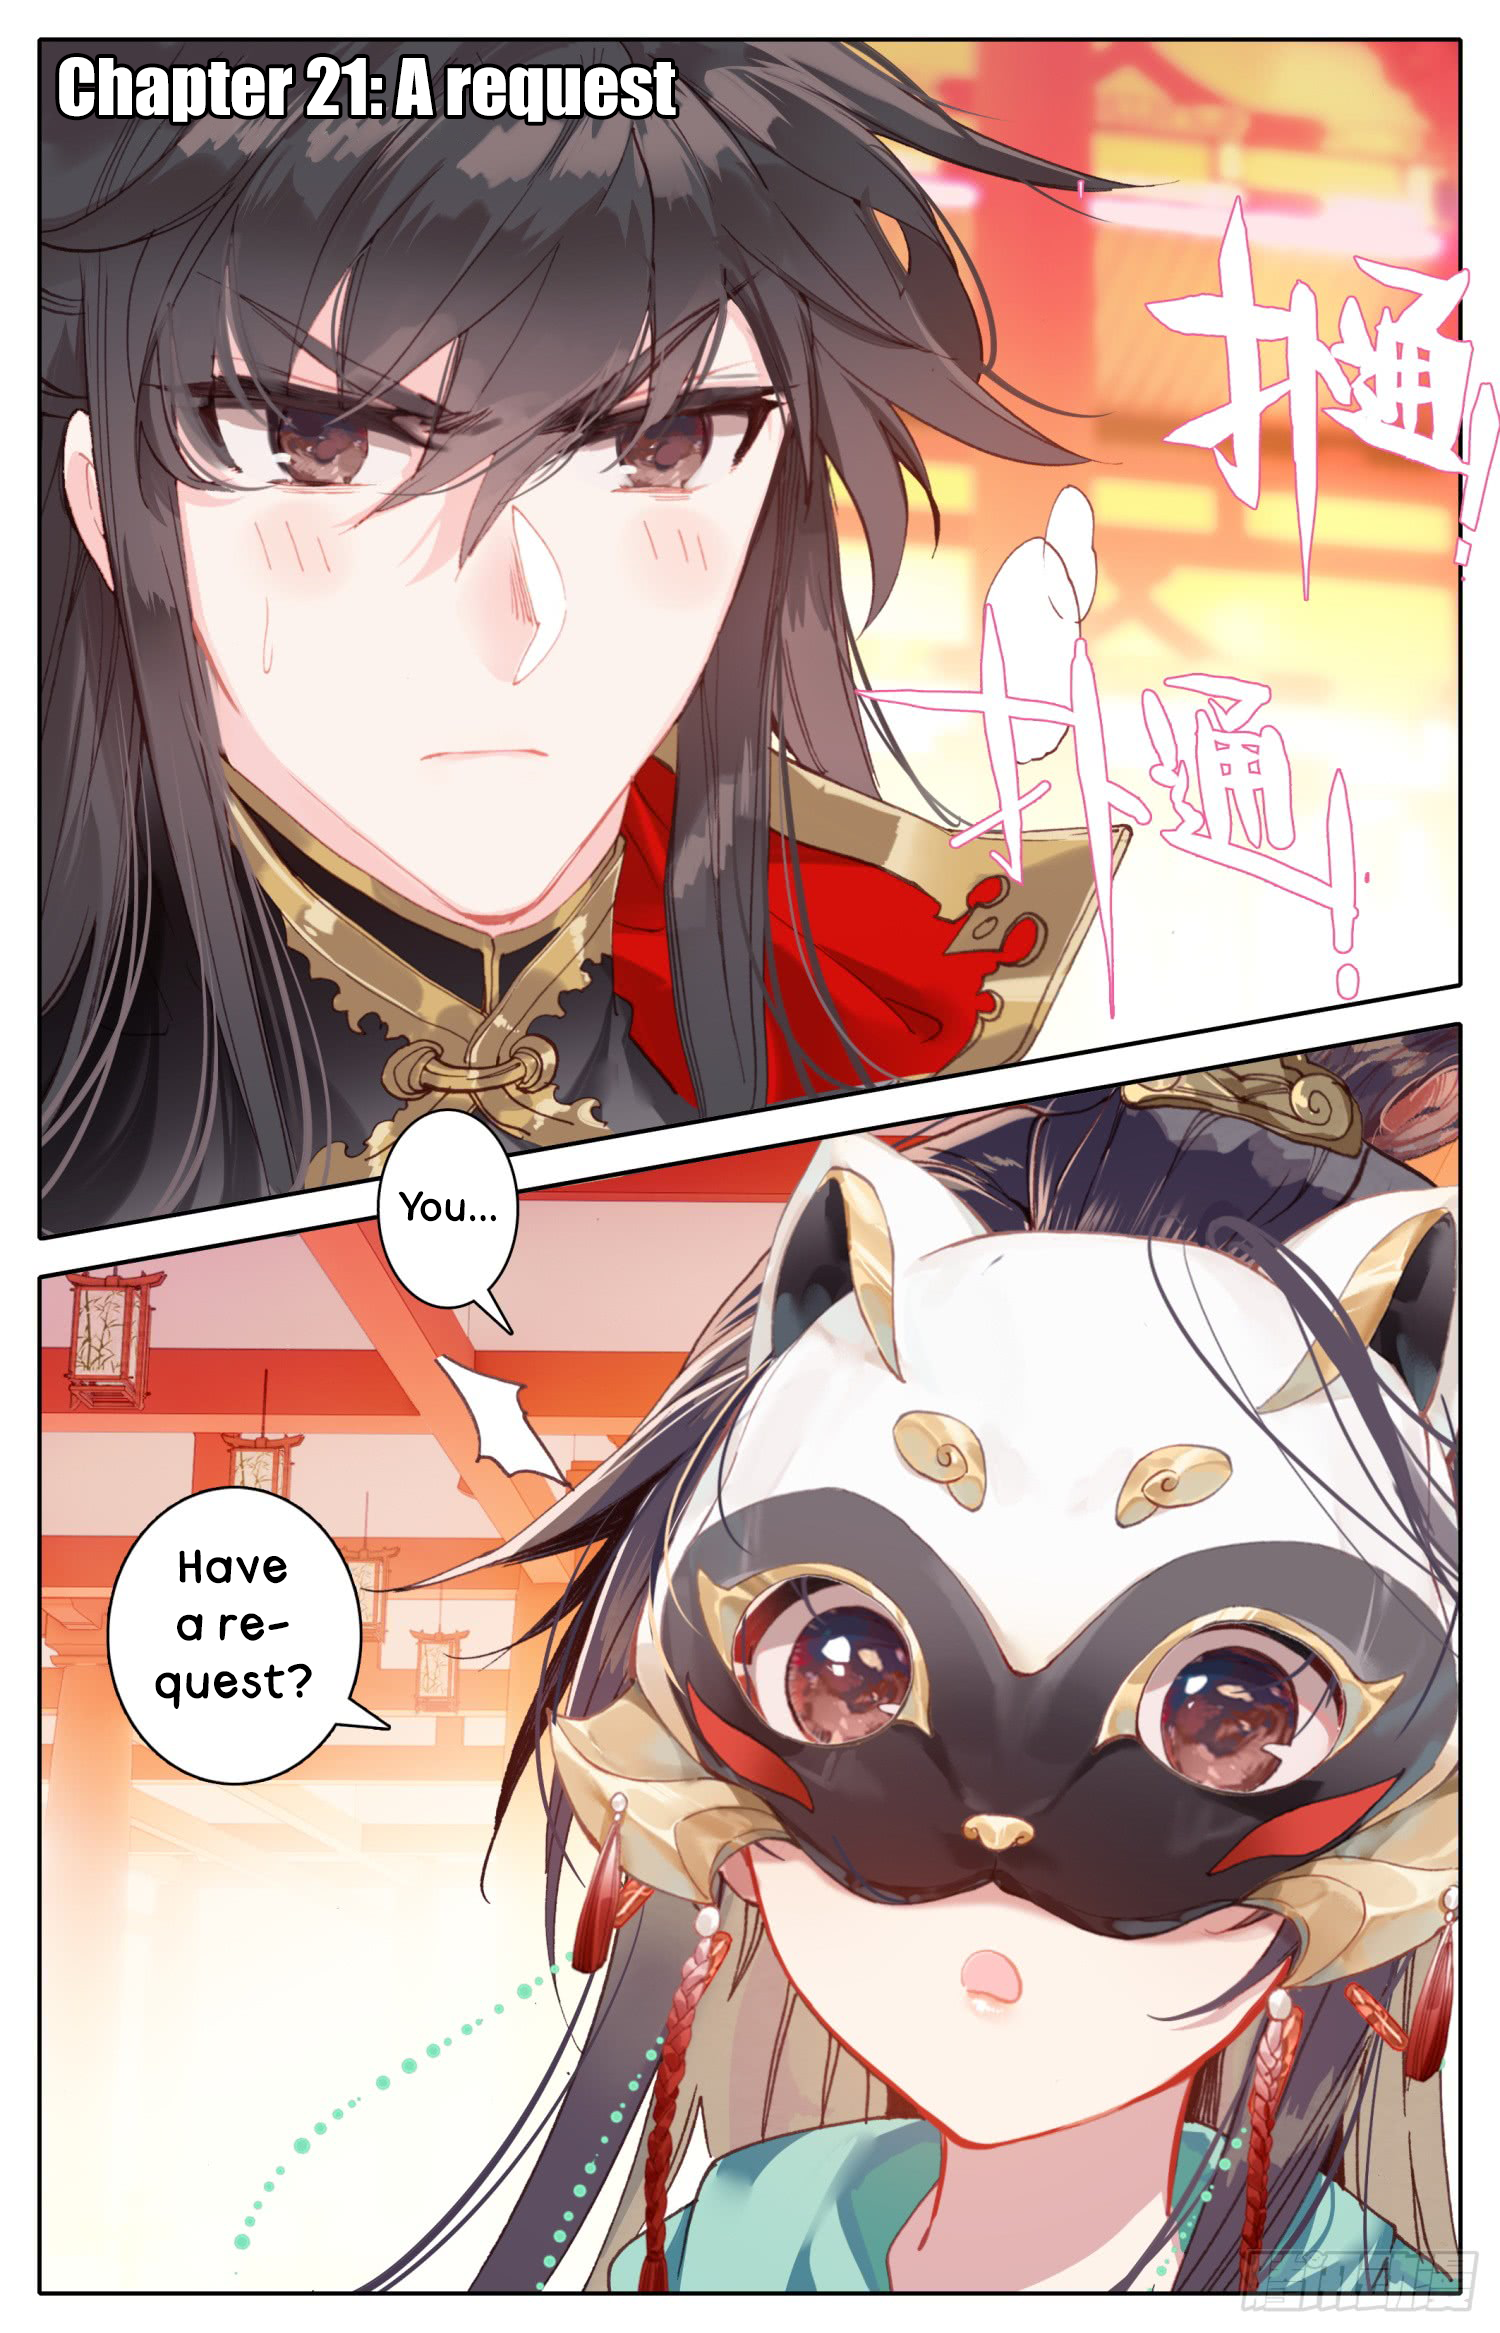 Legend of the Tyrant Empress Chapter 22: A request